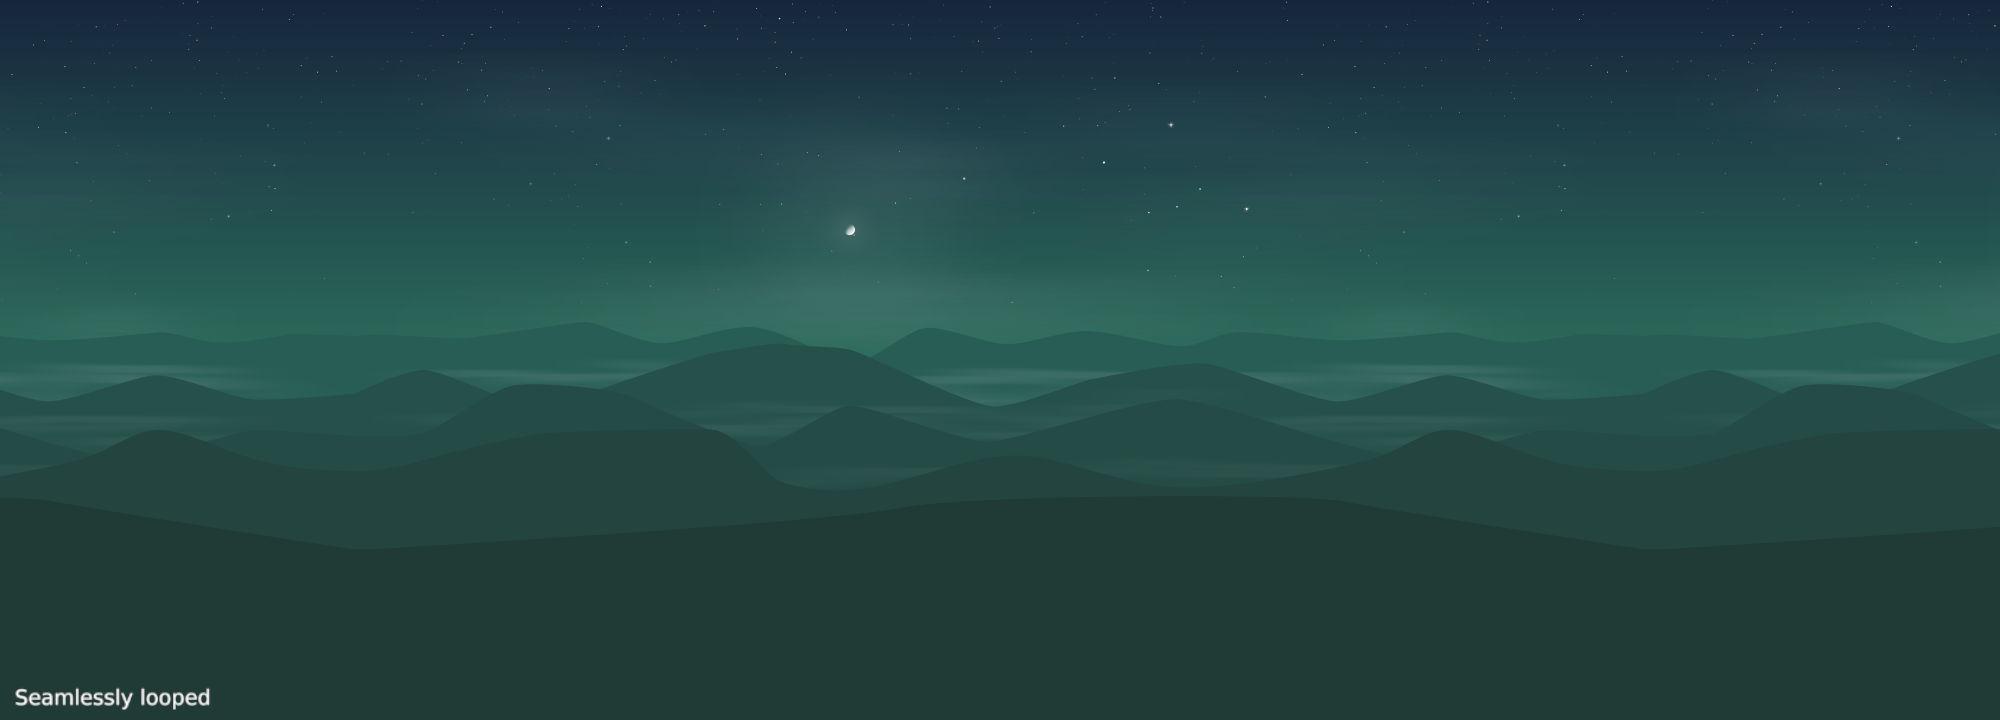 Parallax Backgrounds pack